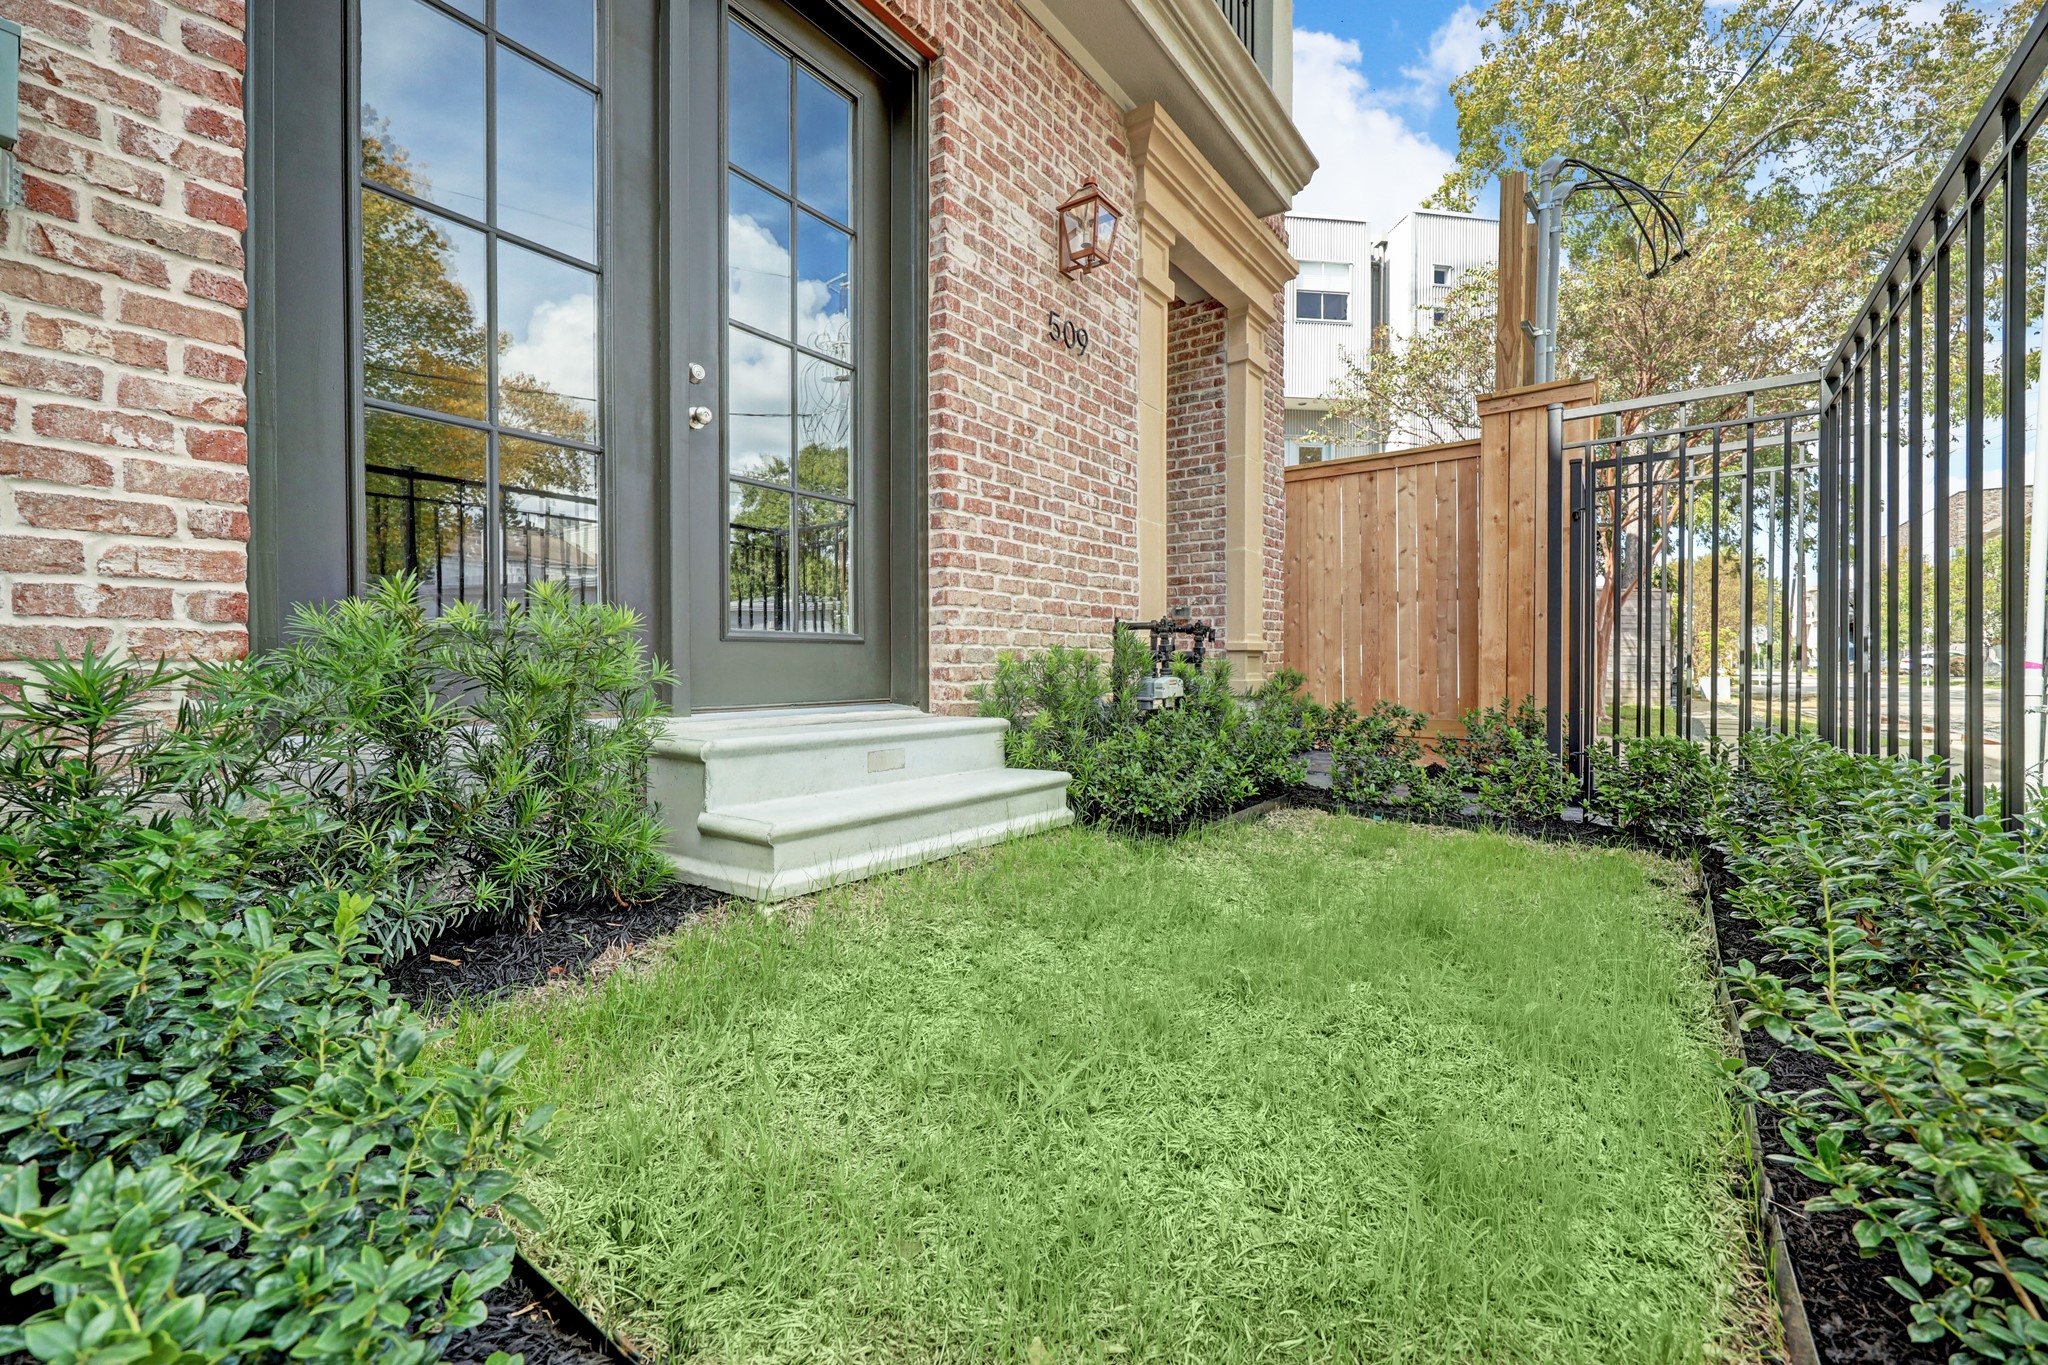 Private fenced yard.